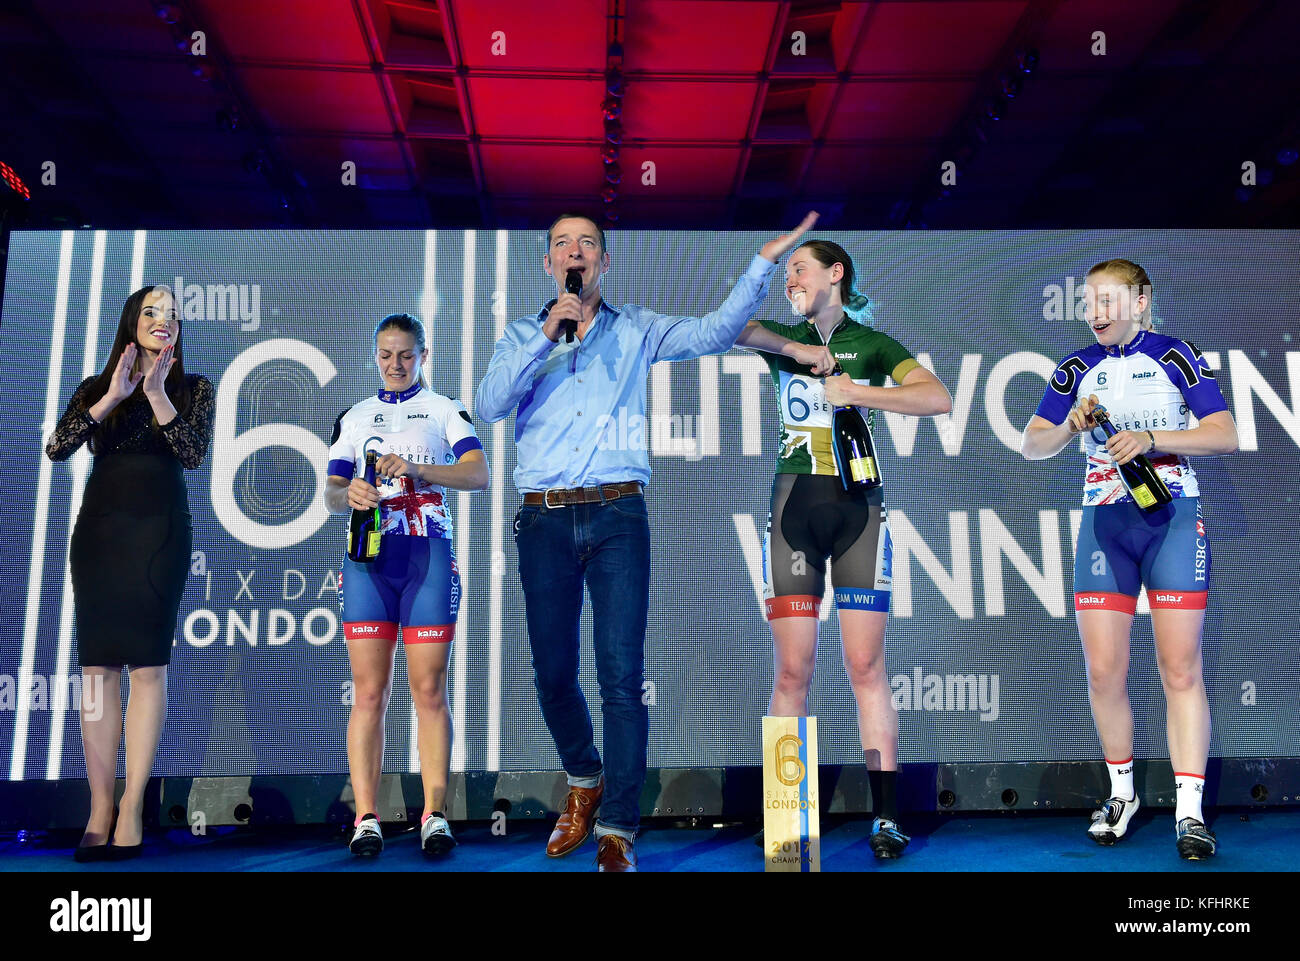 London, UK. 29th Oct, 2017. Rebecca Raybould (GBR), Neah Evans (GBR) and Emily Nelson (GBR) at the Women's Winner Presentation  during Six Day London on Day 6 event on Sunday, 29 October 2017, London England. Credit: Taka Wu/Alamy Live News Stock Photo